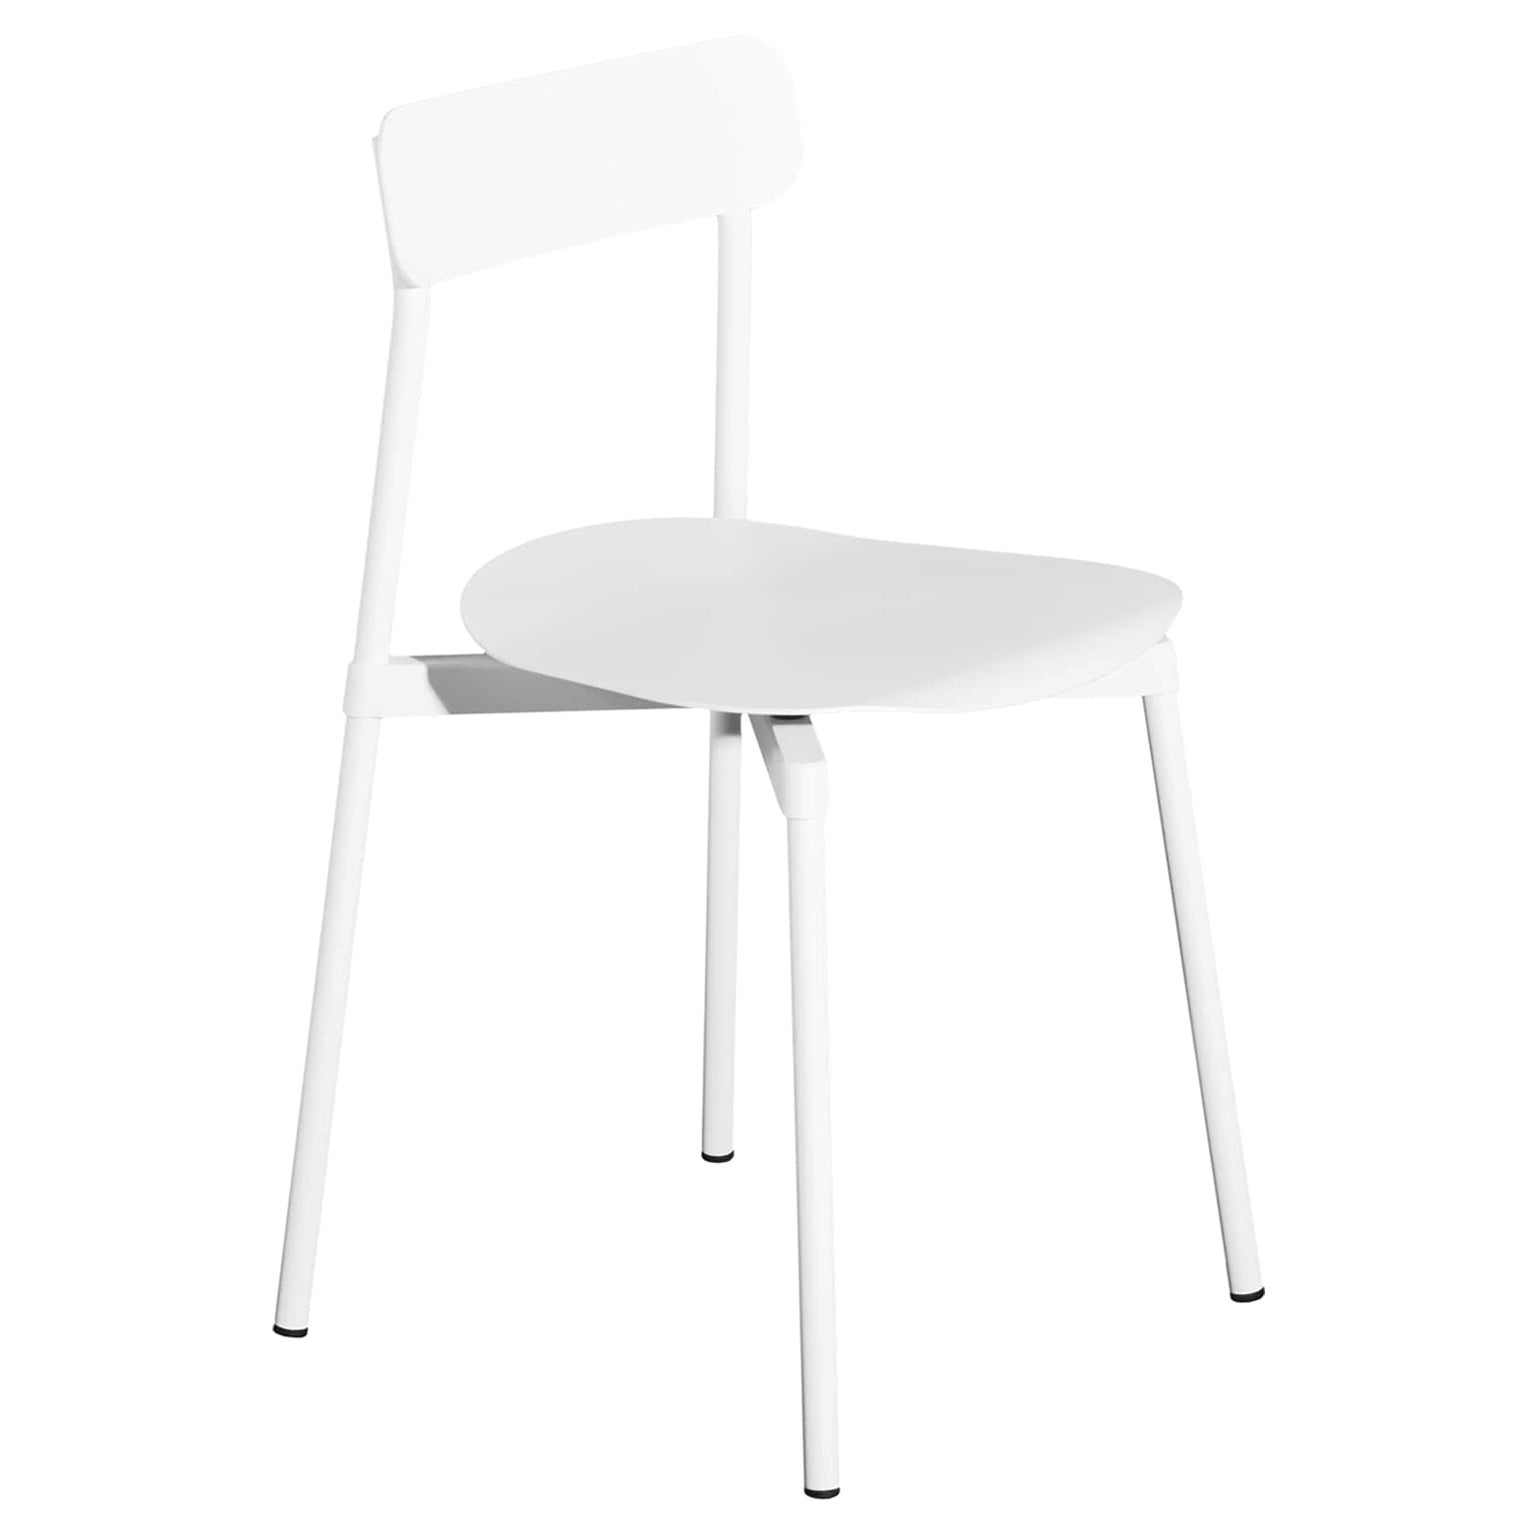 Petite Friture Fromme Chair in White Aluminium by Tom Chung, 2019